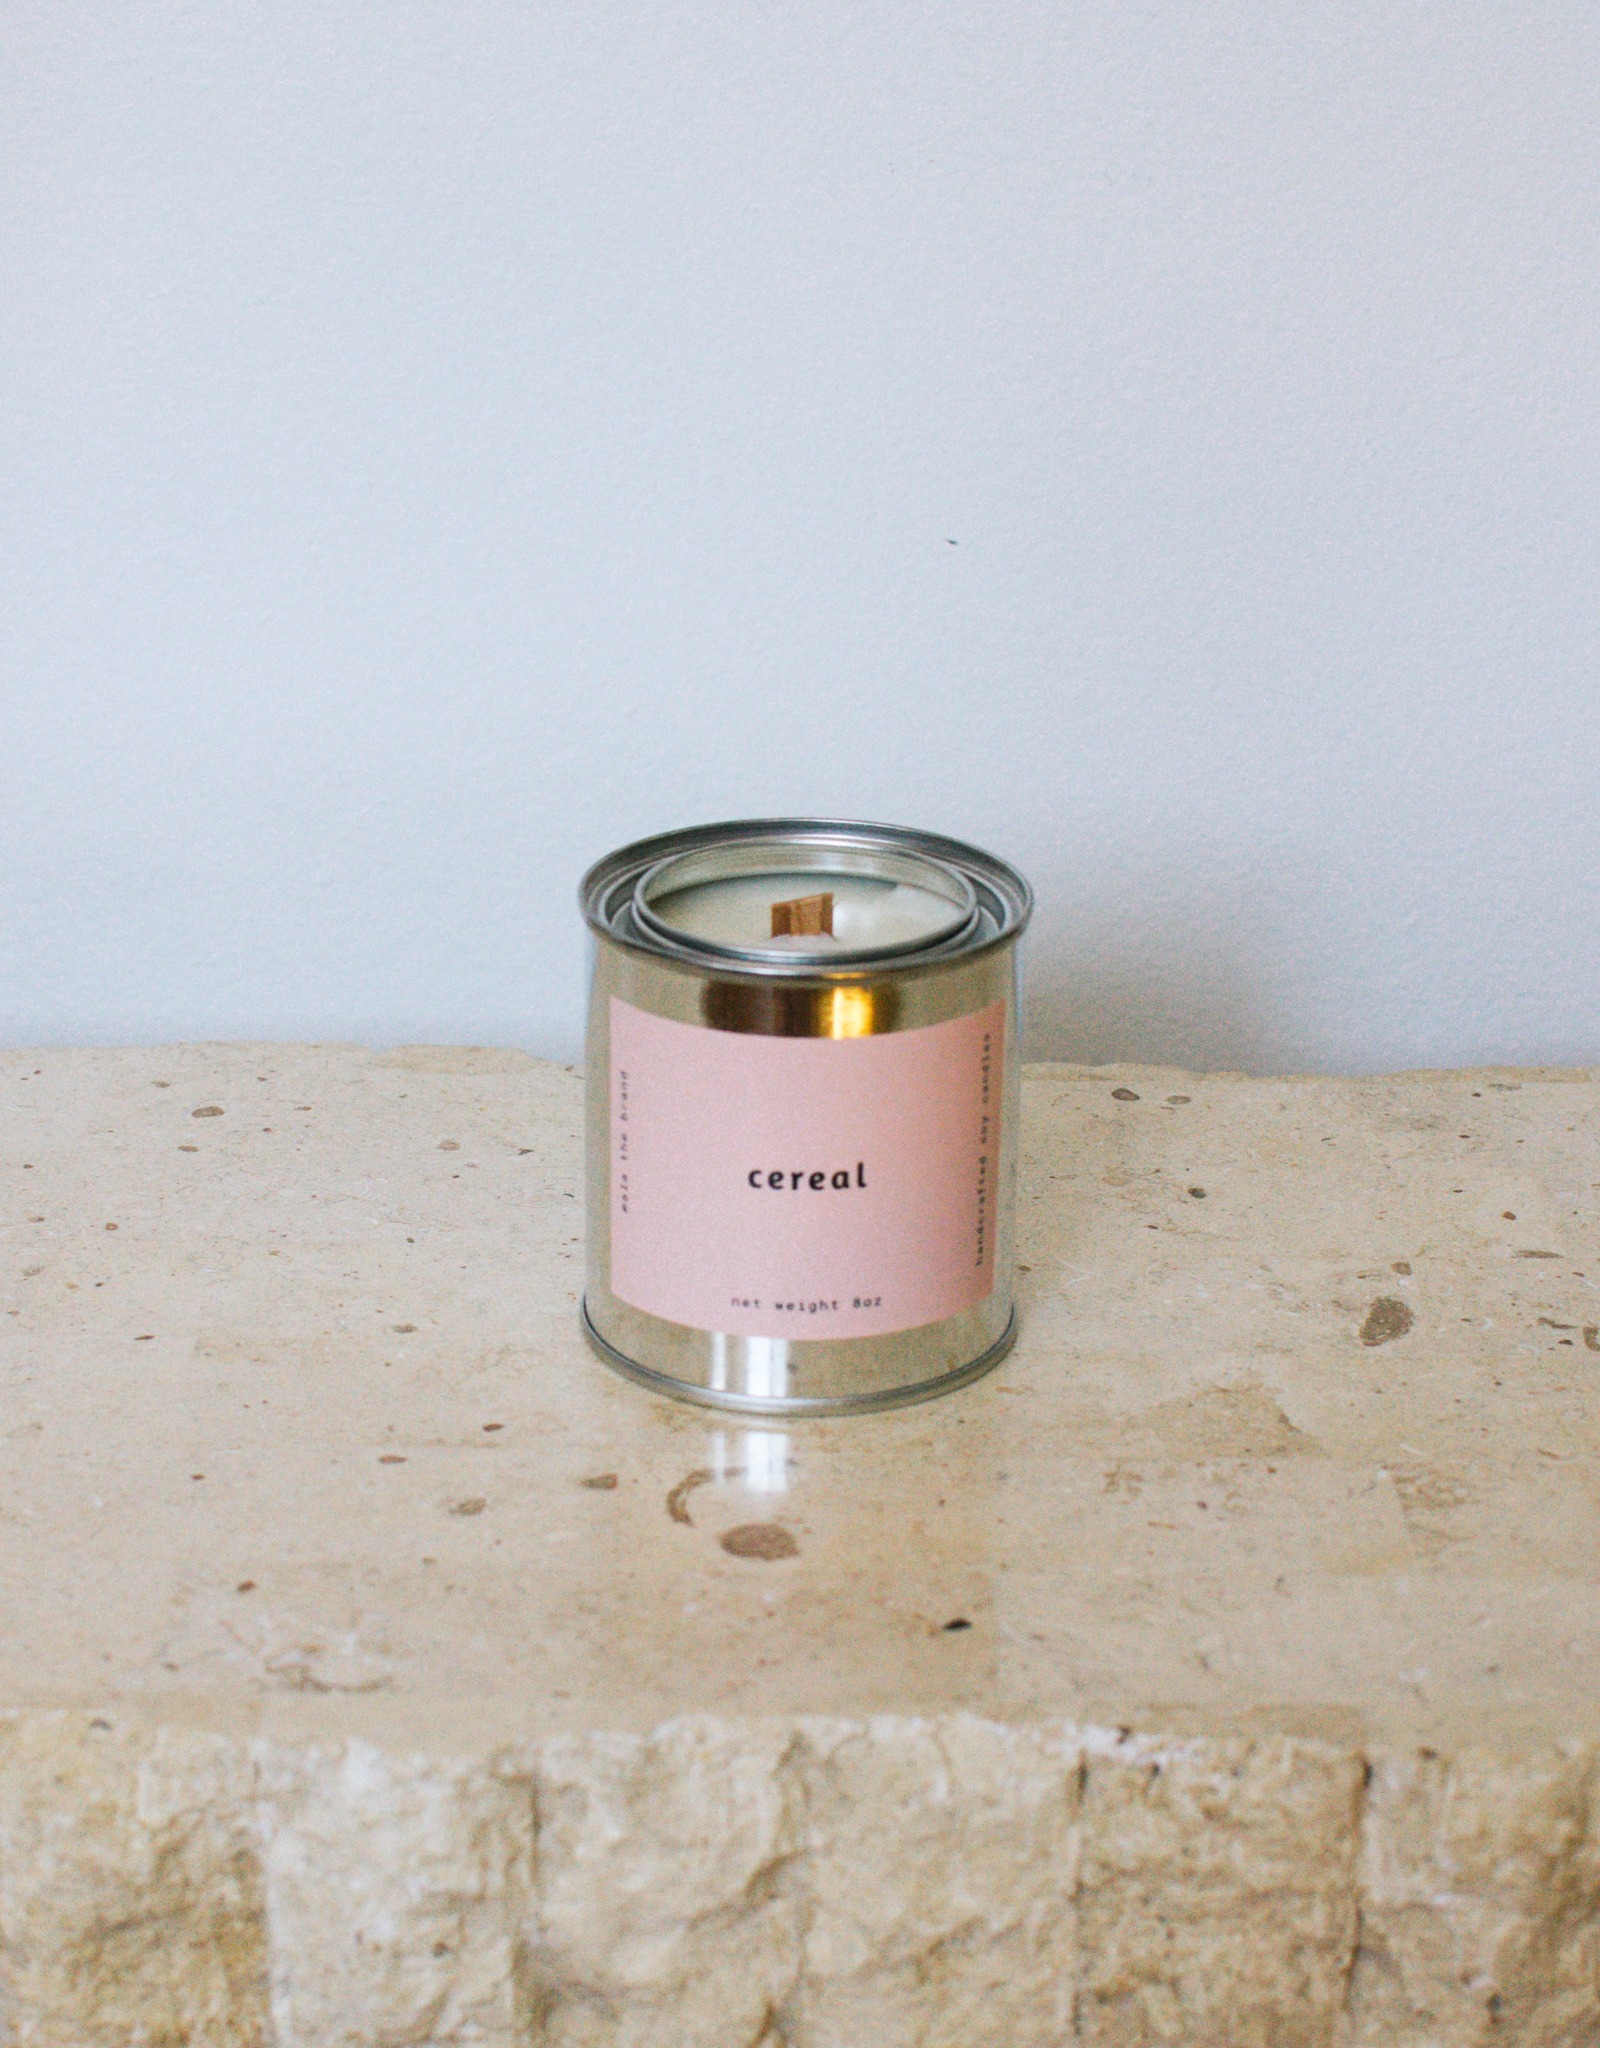 Mala The Brand Cereal Candle / Citrus + Berry + Lemon